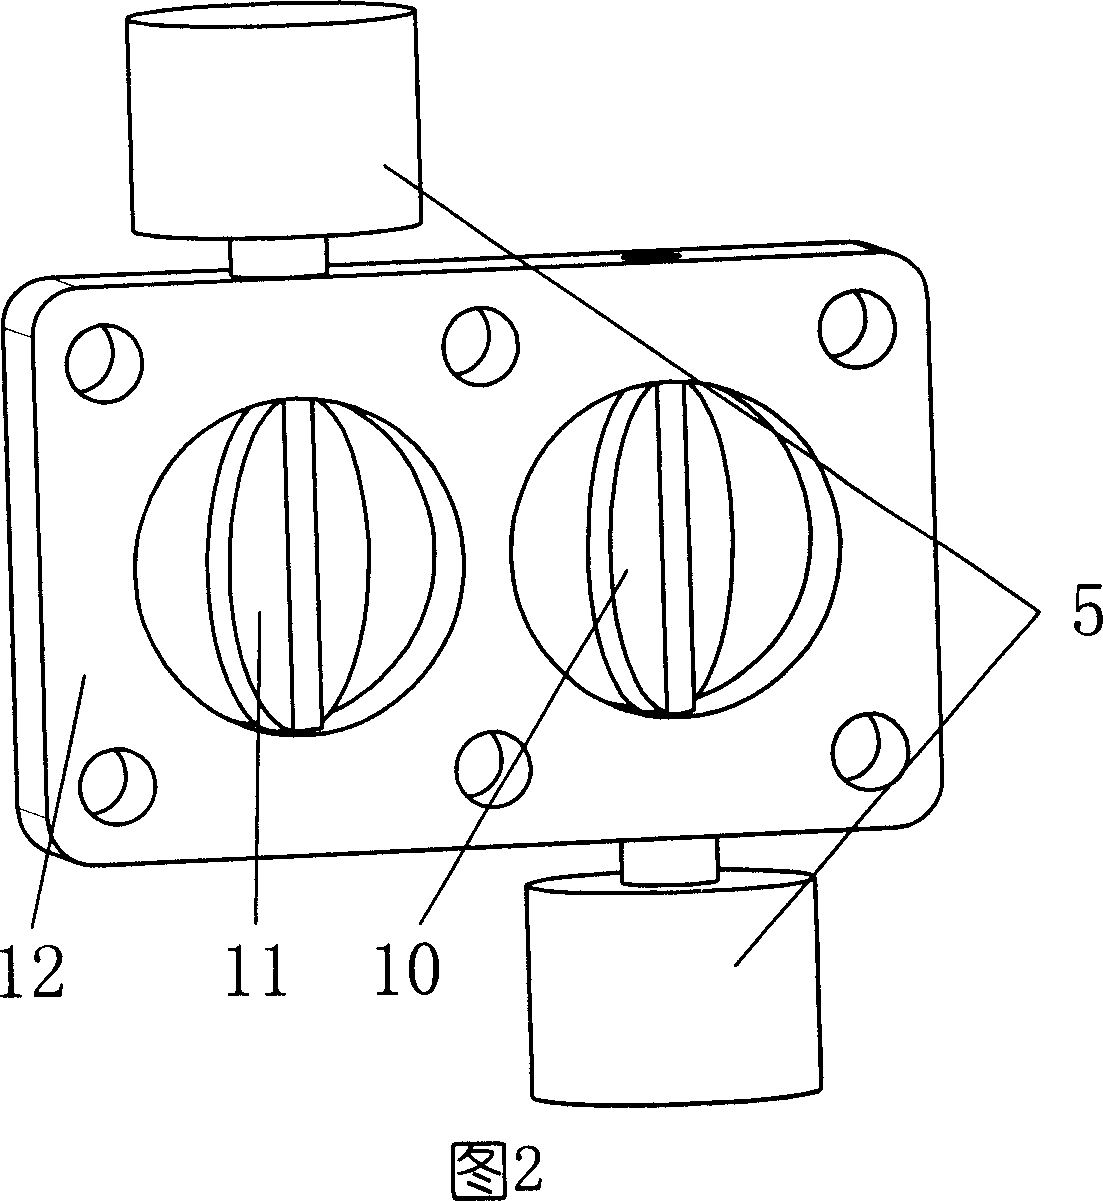 Composite gas inlet system for engine